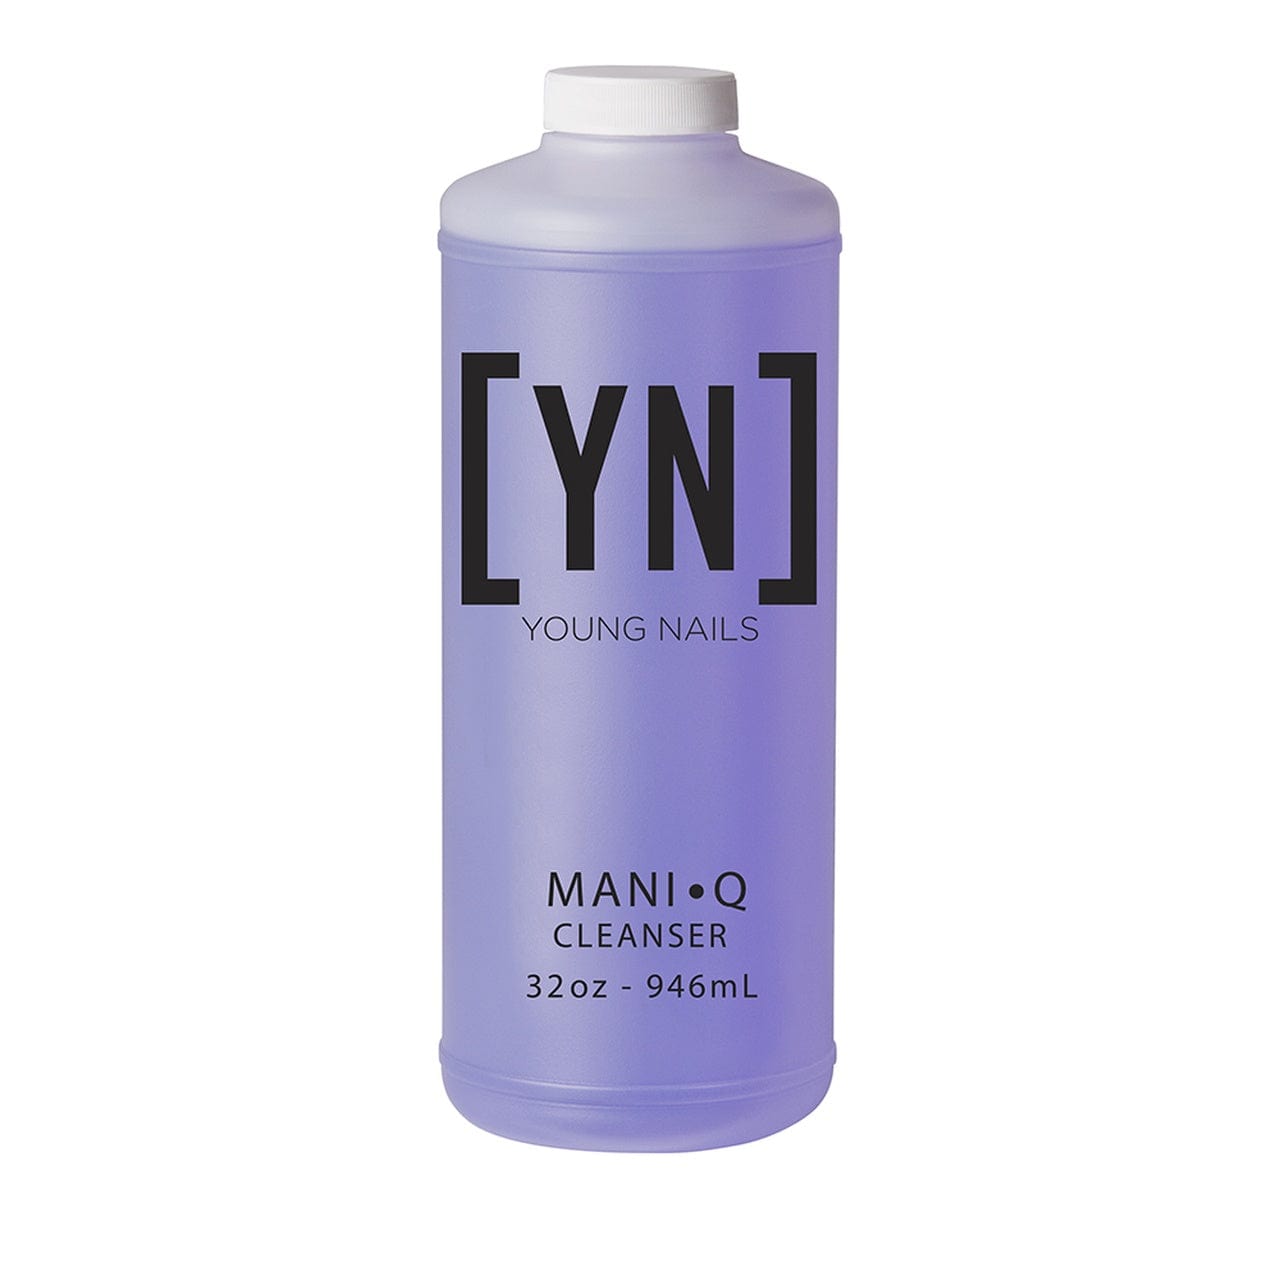 Mani Q Cleanser 946ml Nails - Young Nails - Luxe Pacifique